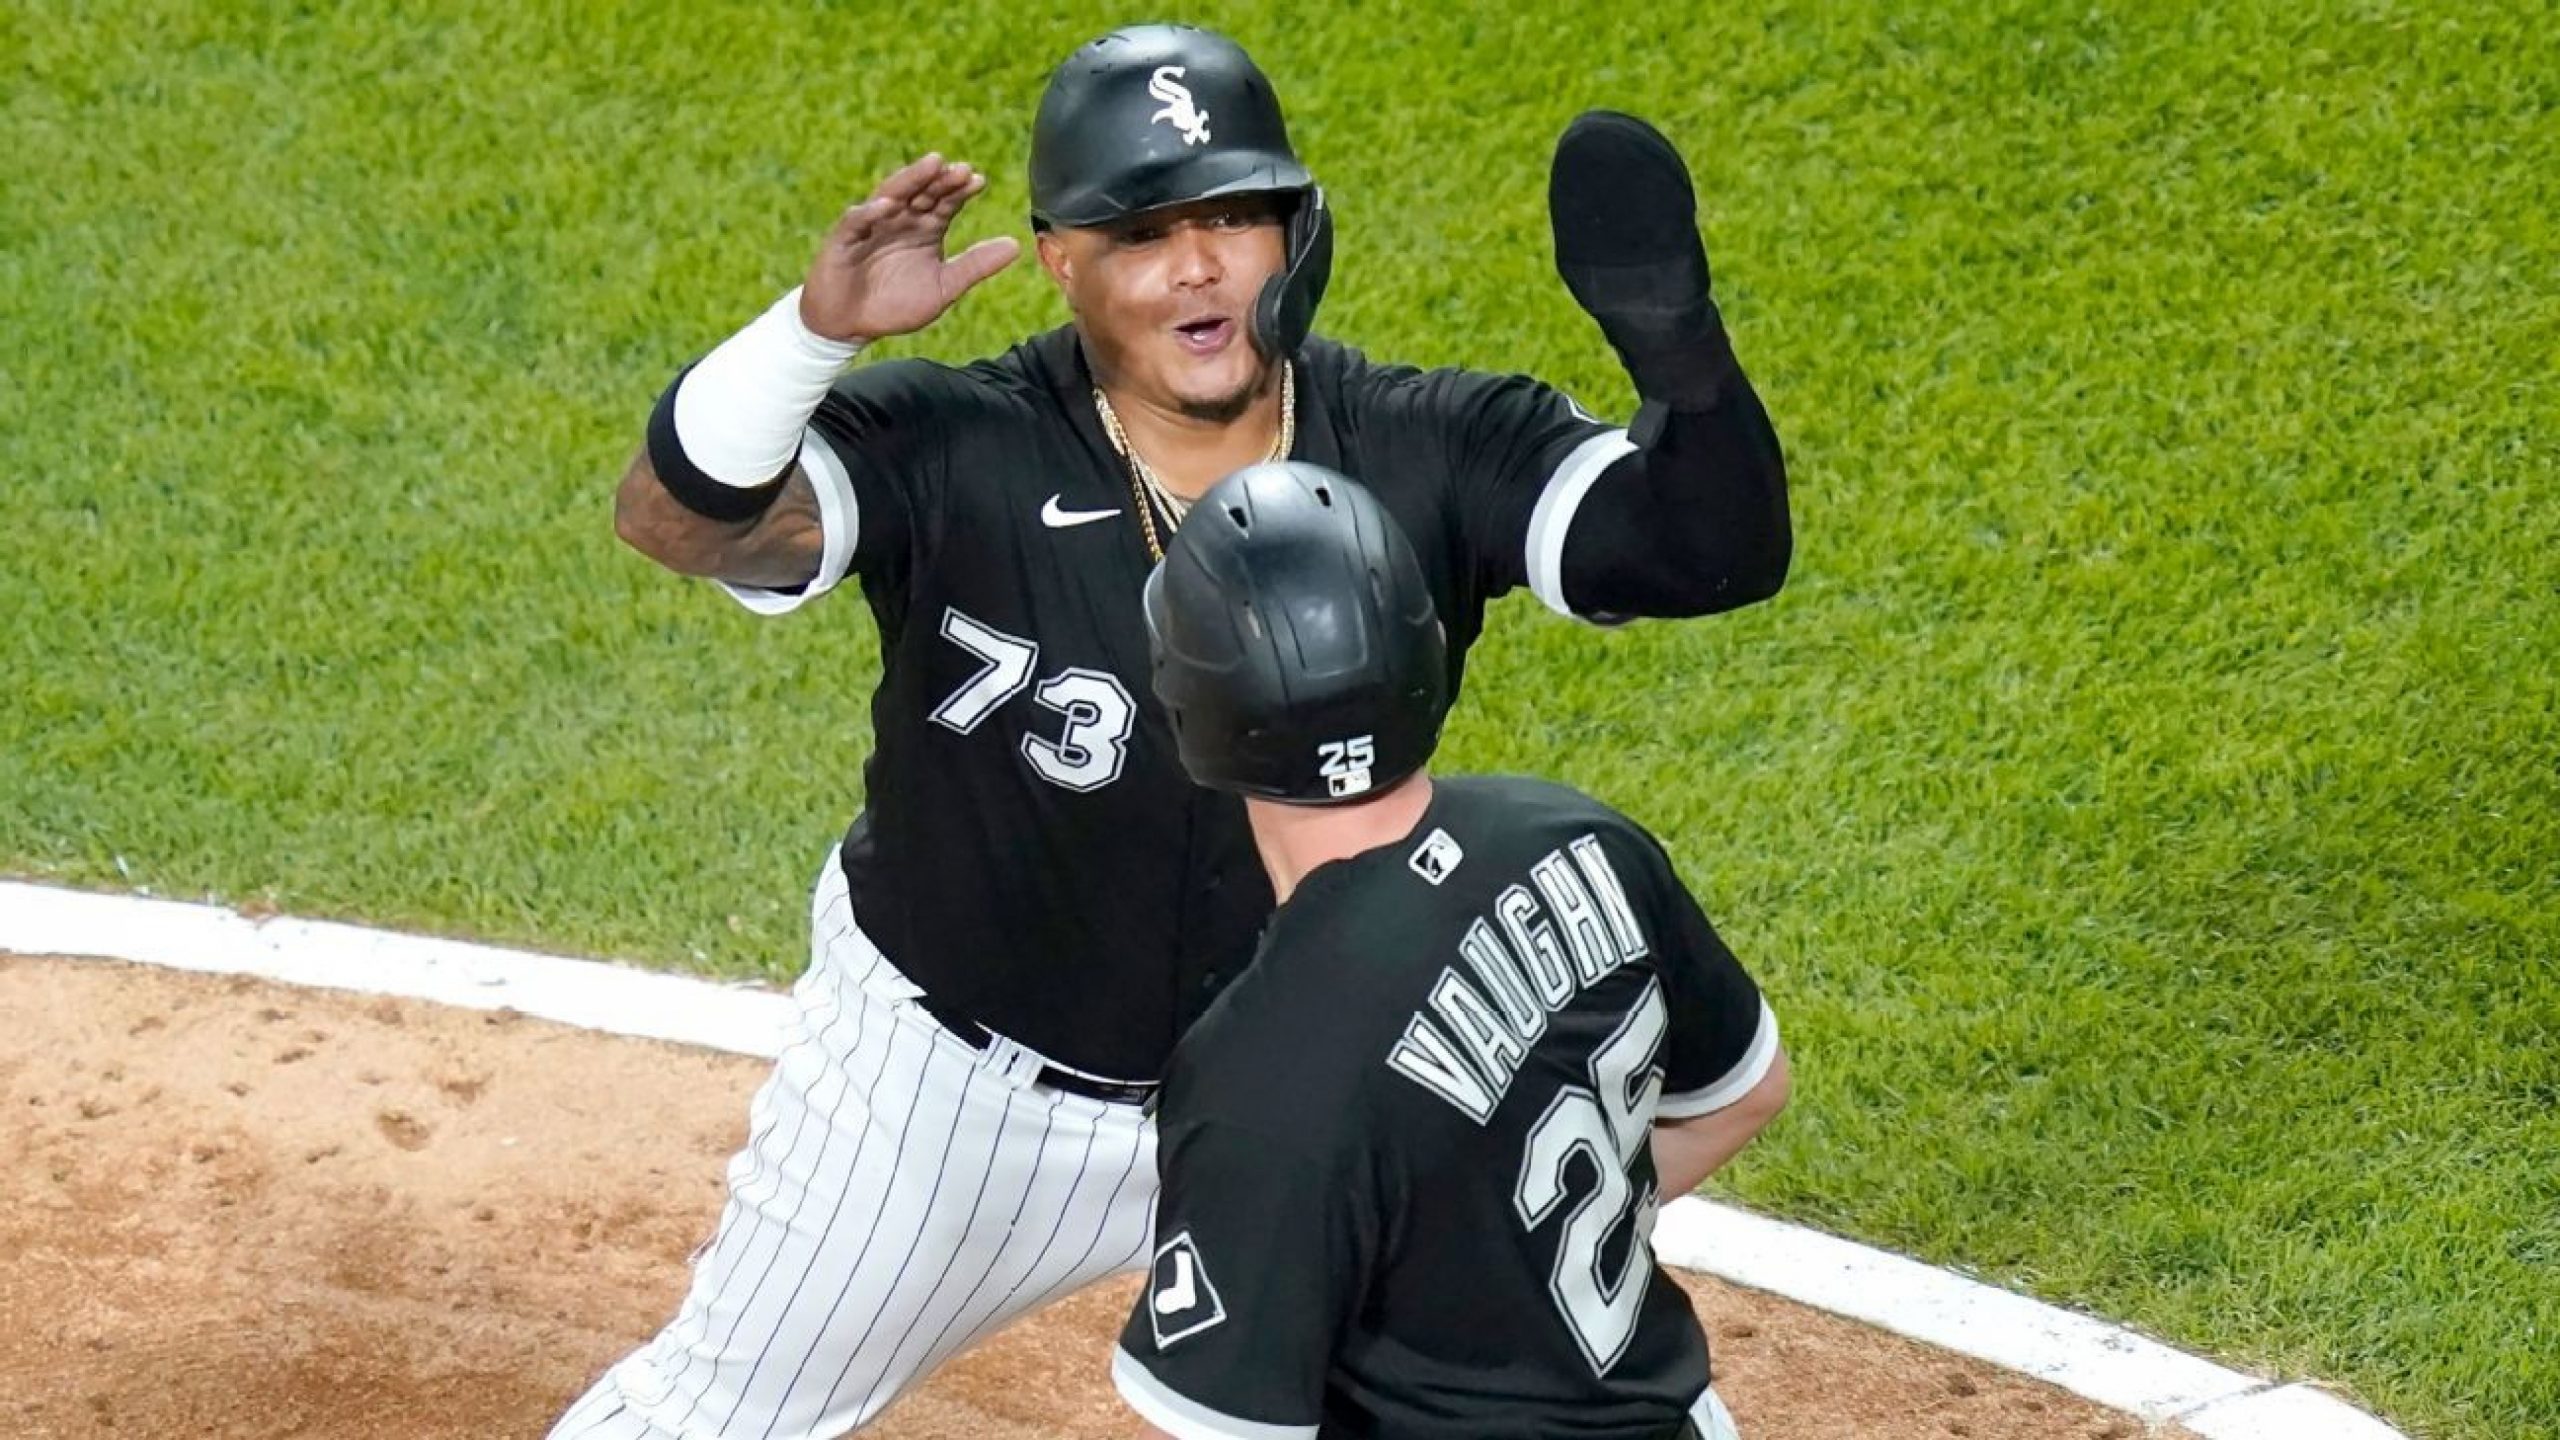 ‘We know what’s going on’: Inside the unlikely union of TLR and the White Sox